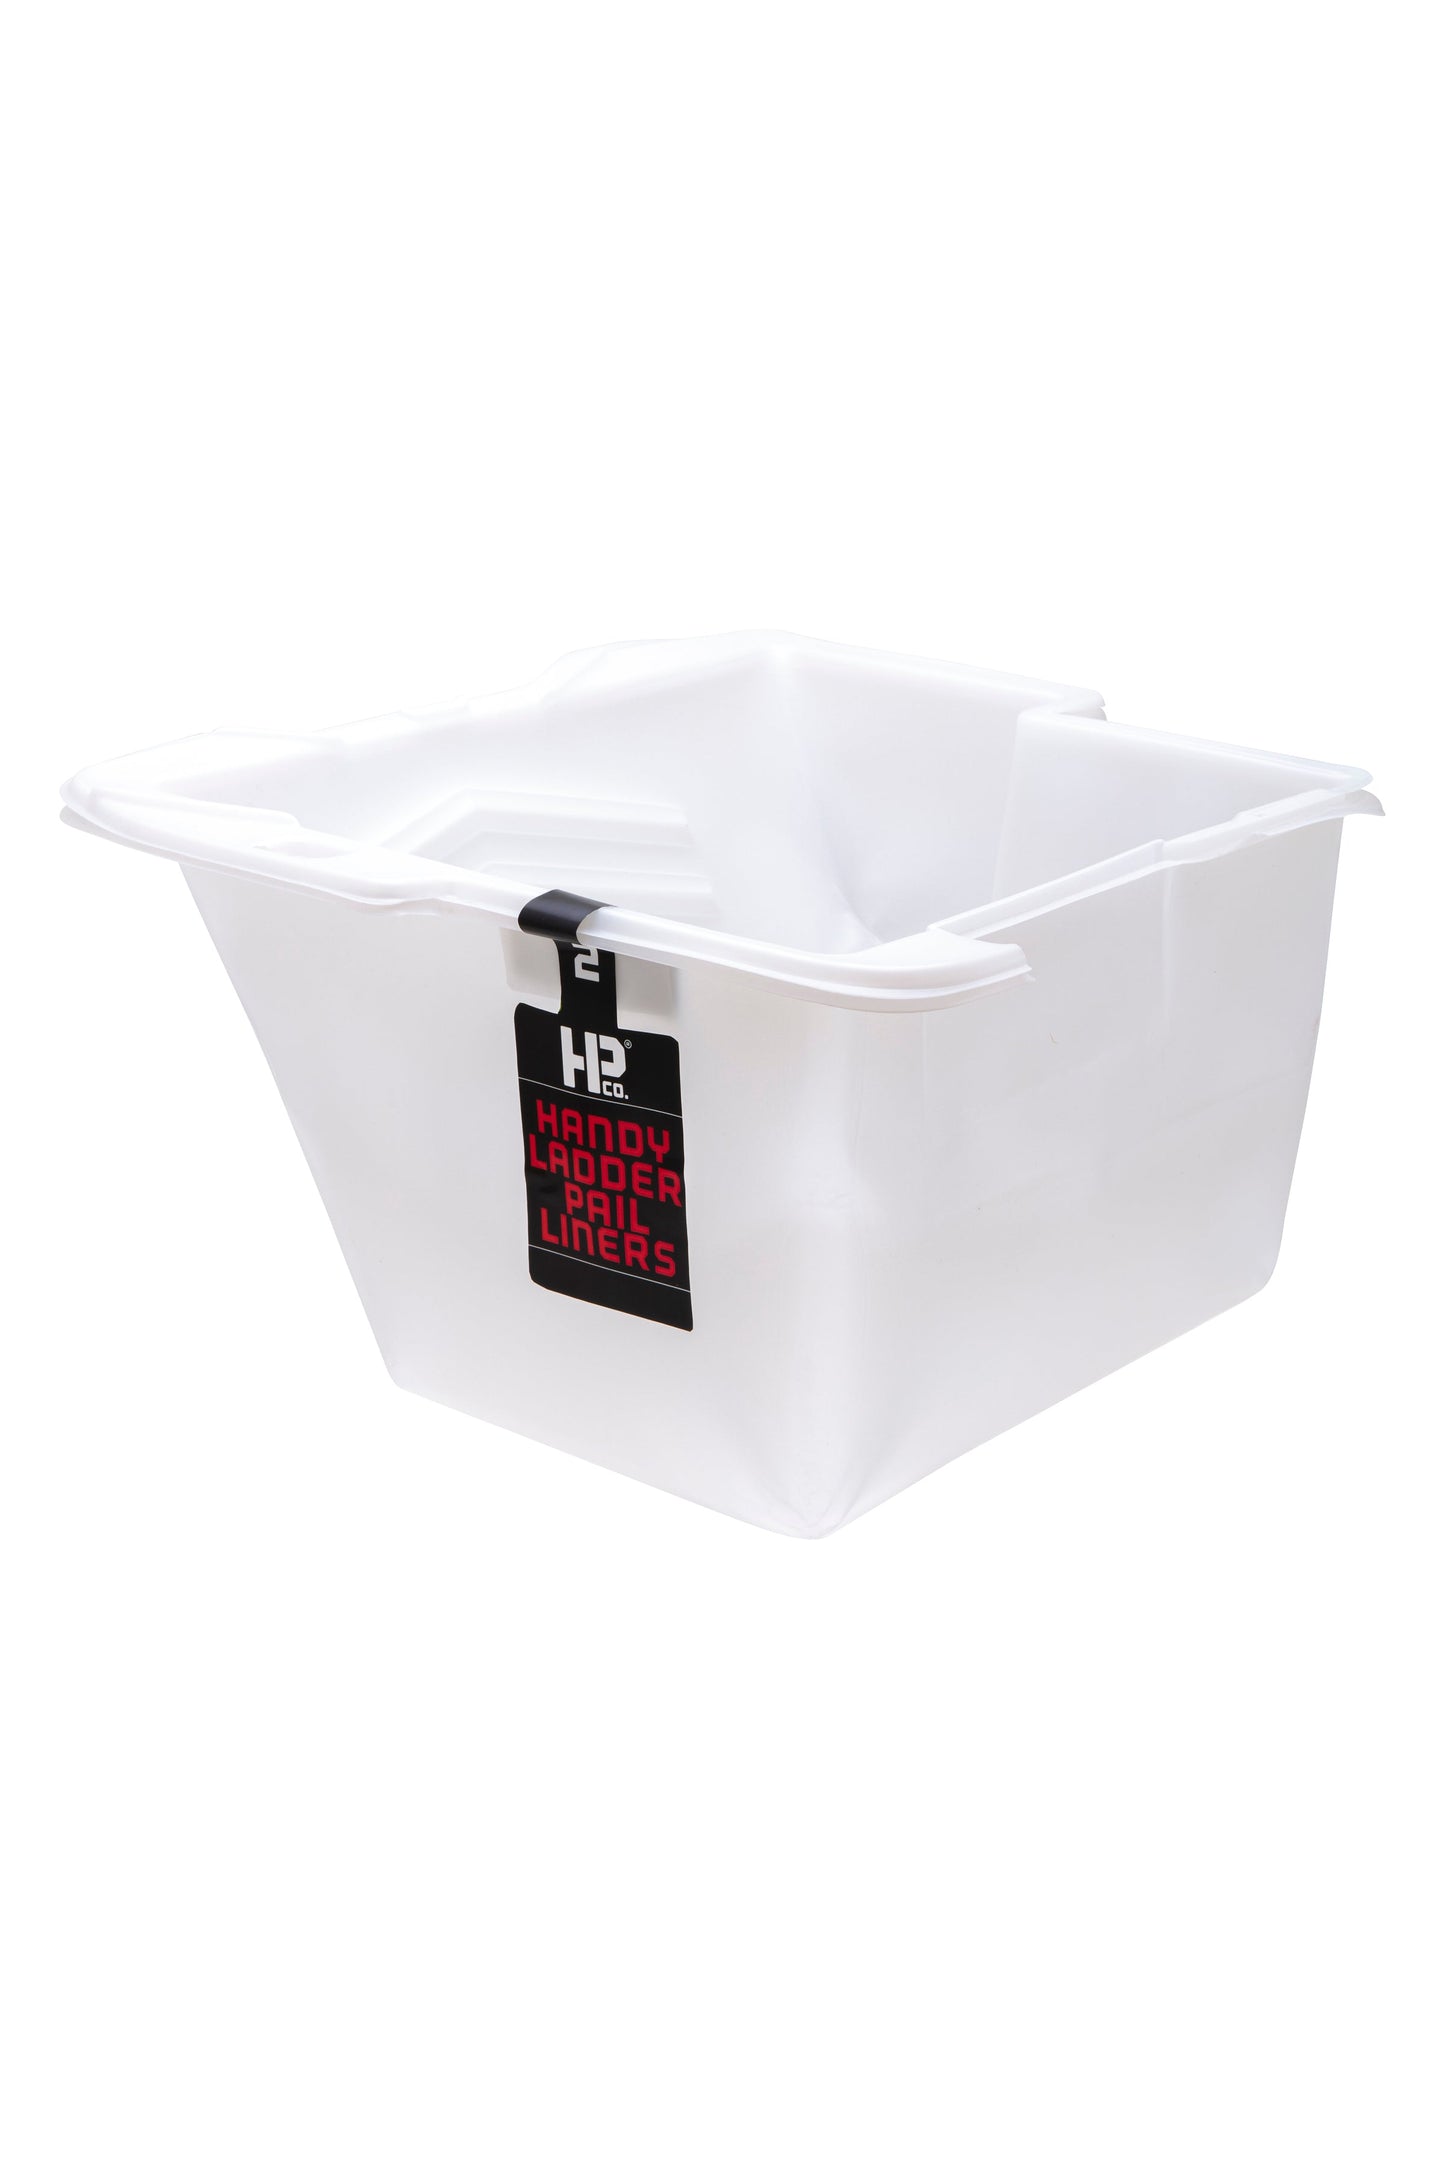 Handy Ladder Pail Liners -12 pk (24 single Liners)